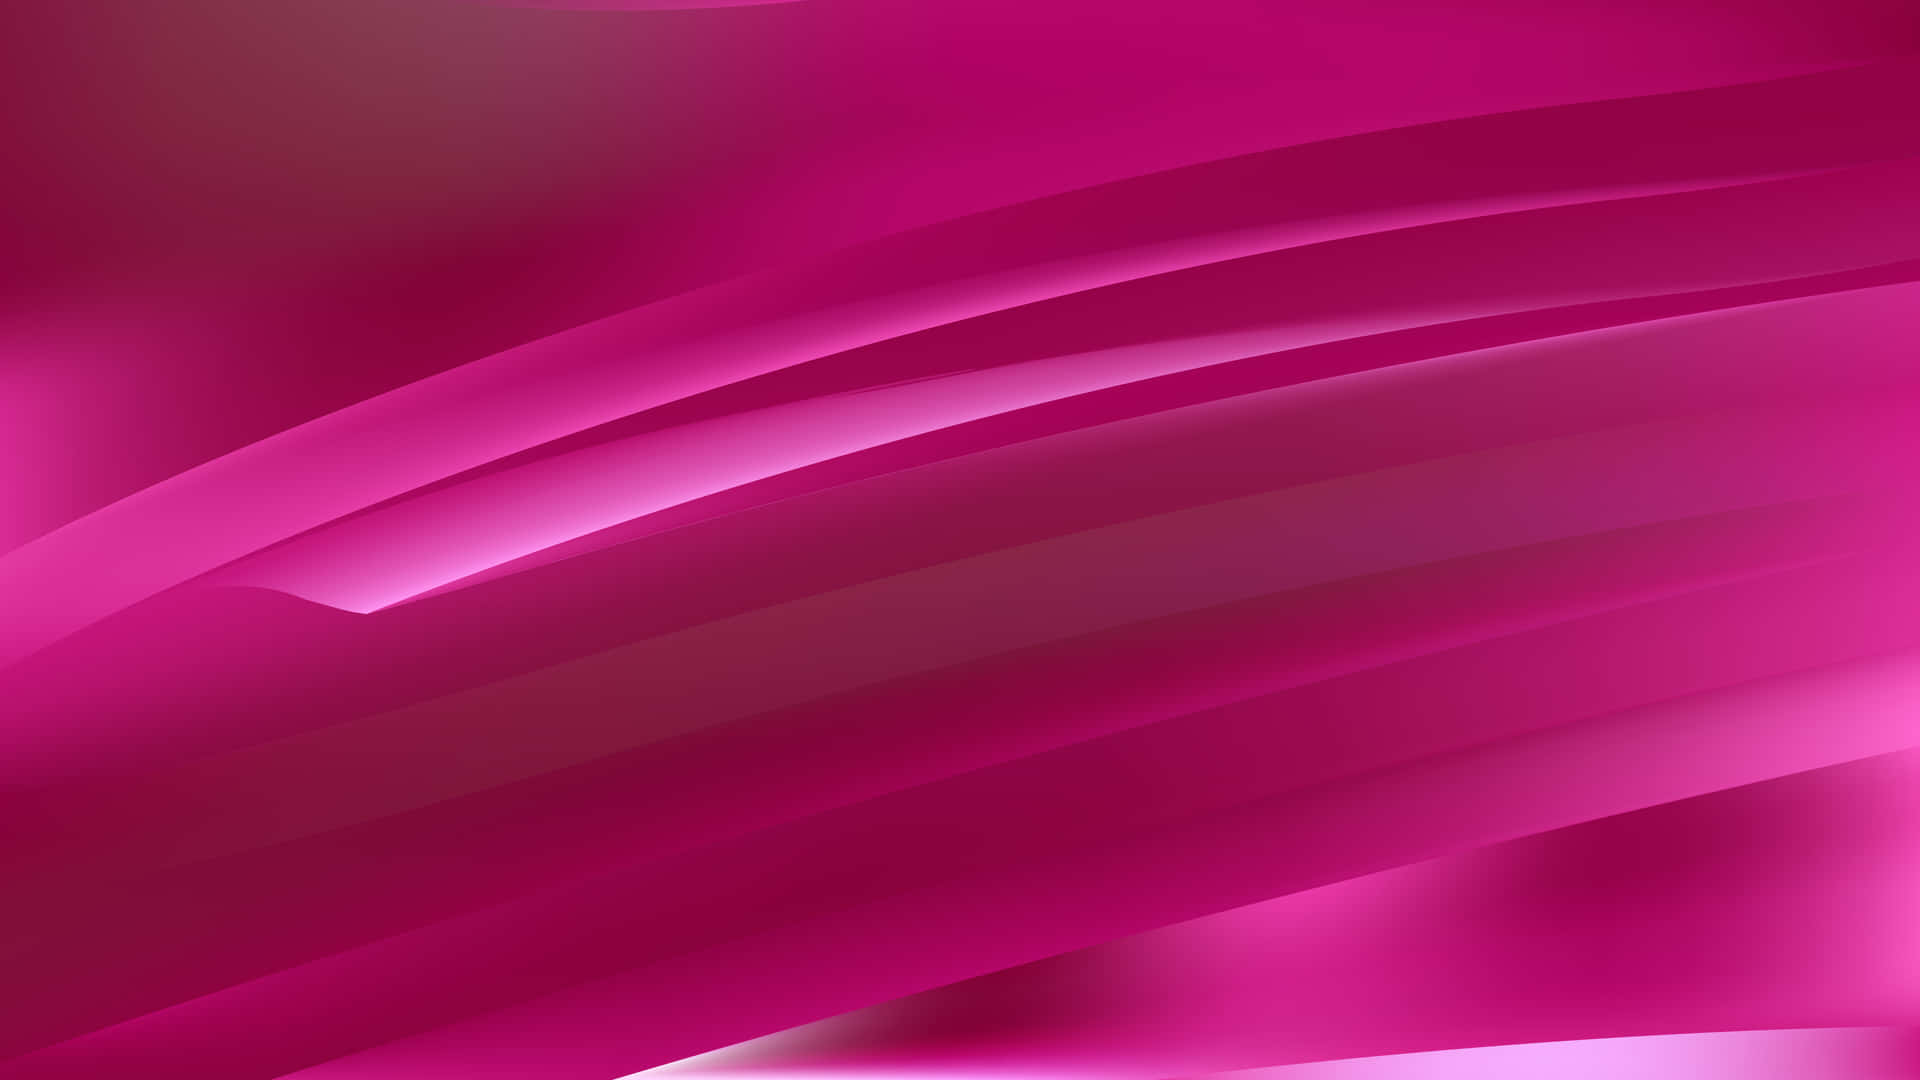 Pink Abstract Background With Wavy Lines